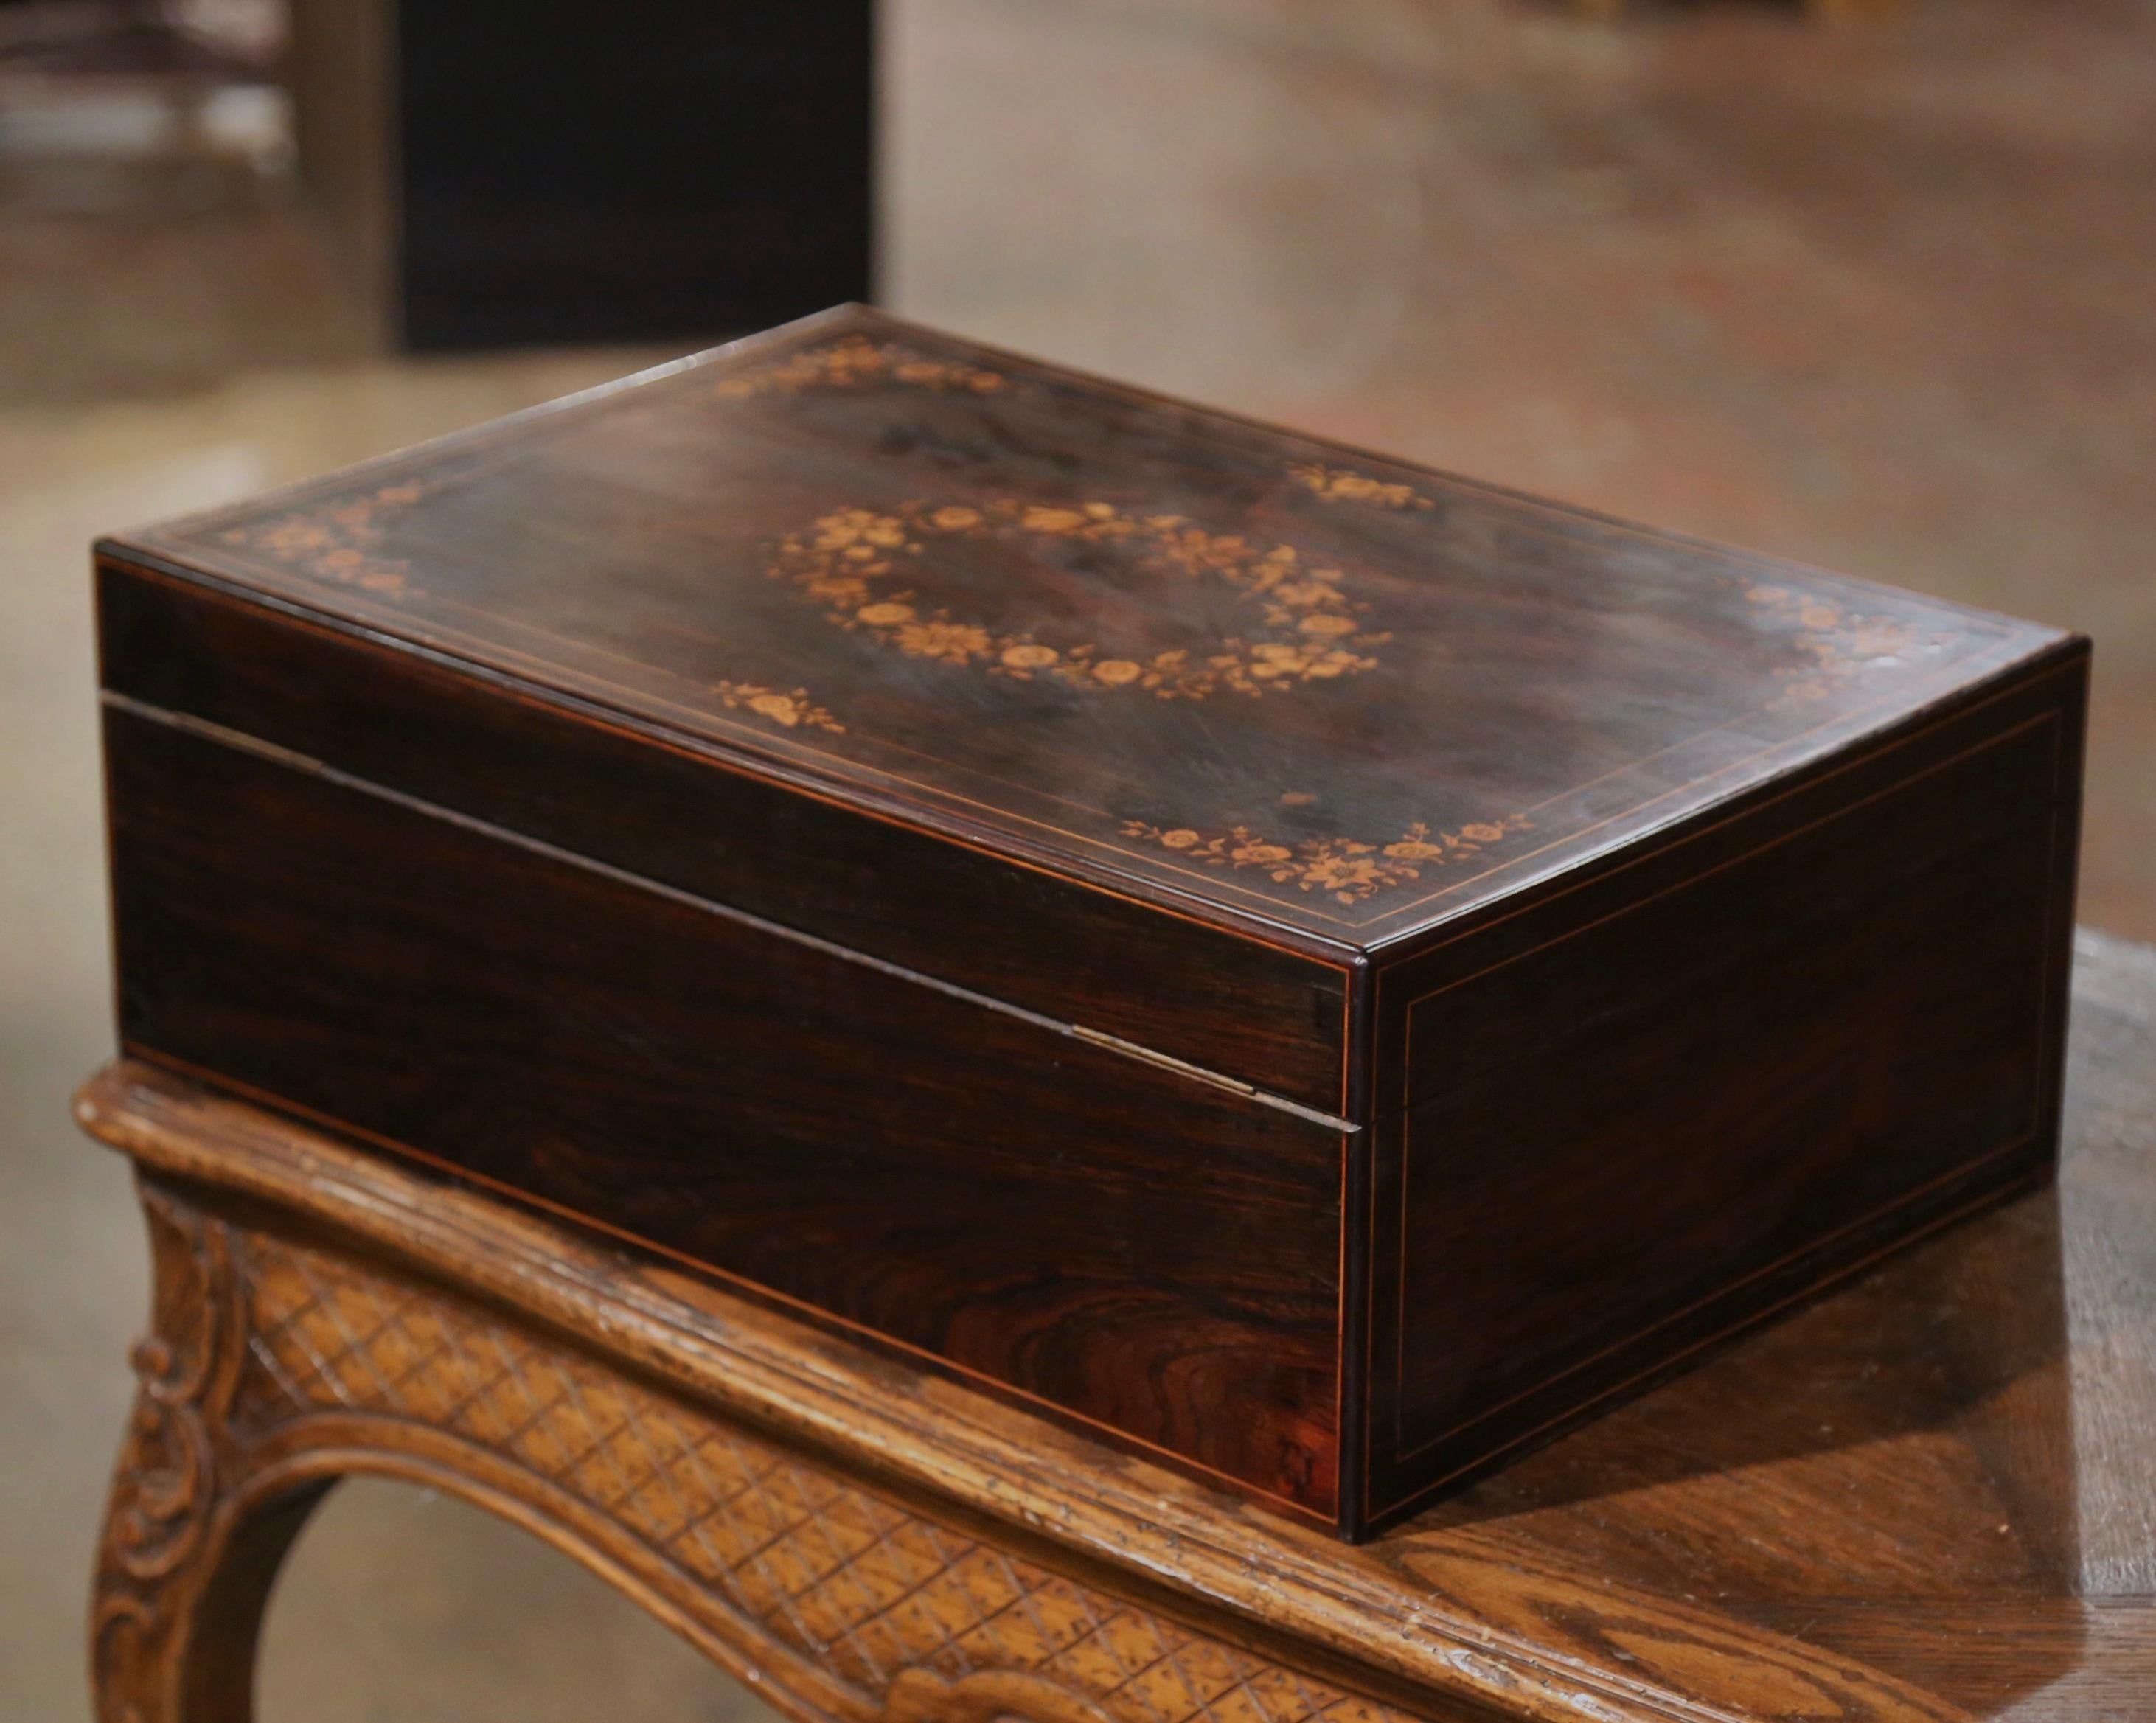 19th Century French Napoleon III Floral Inlaid Rosewood Decorative Jewelry Box For Sale 8